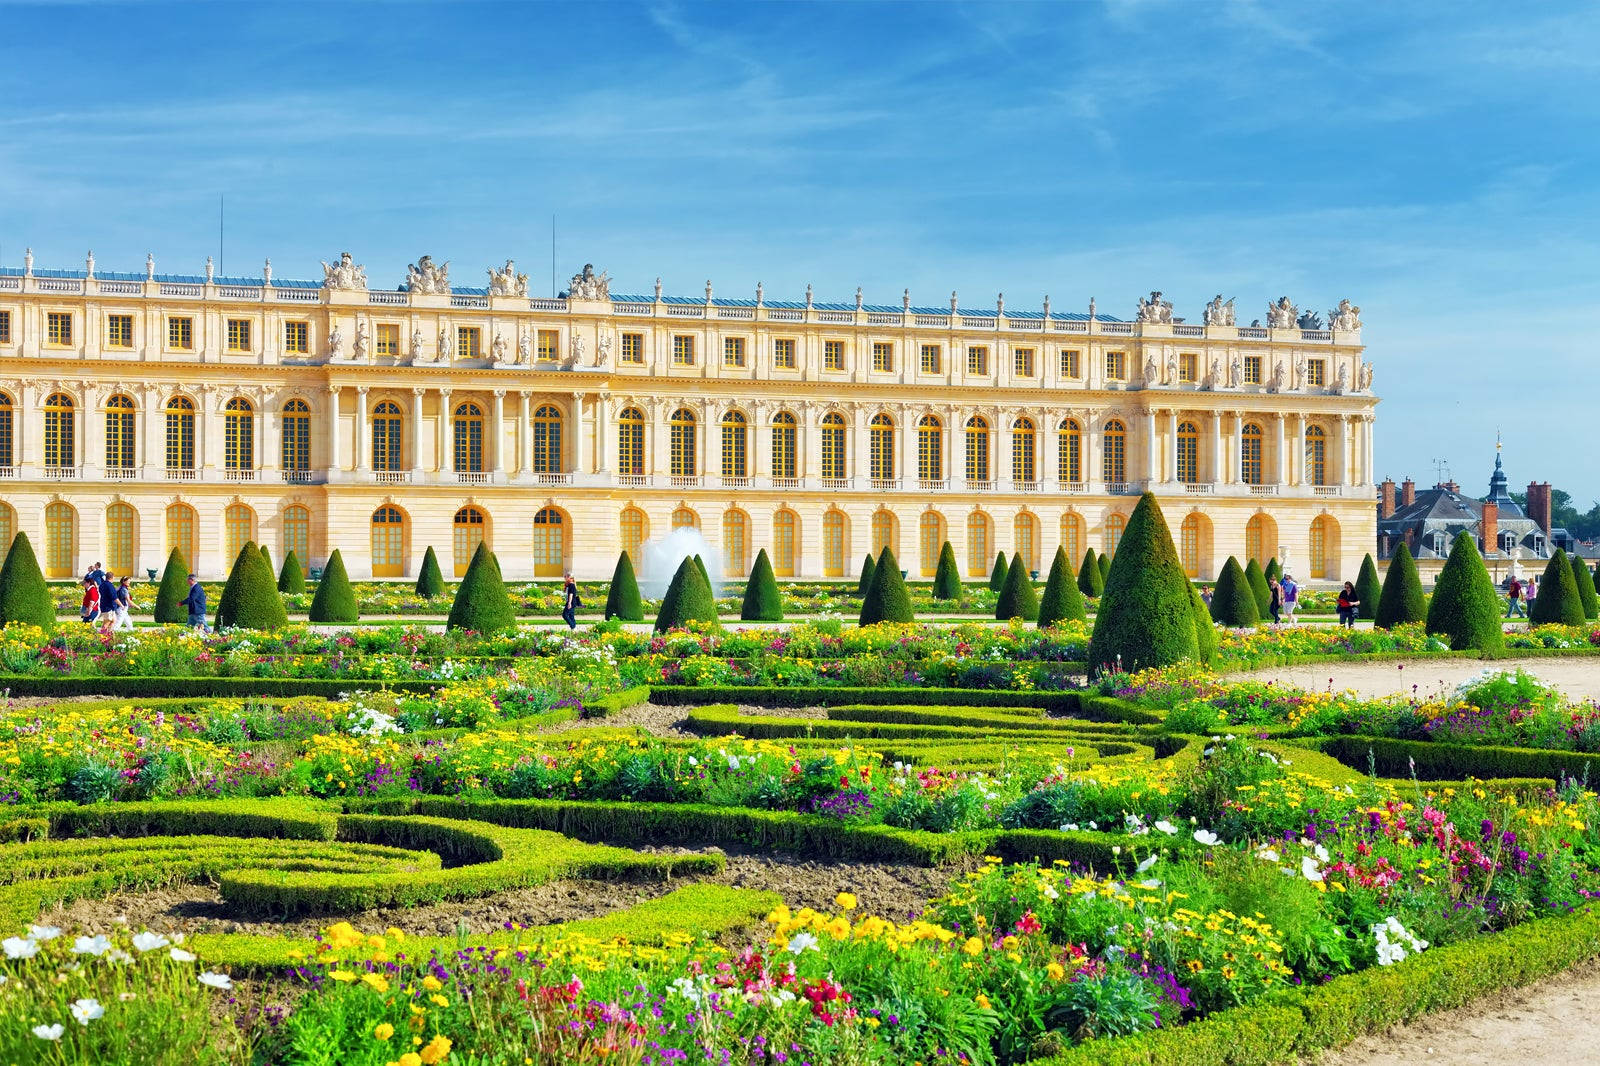 Flowers Blooming In The Gardens Of The Palace Of Versailles